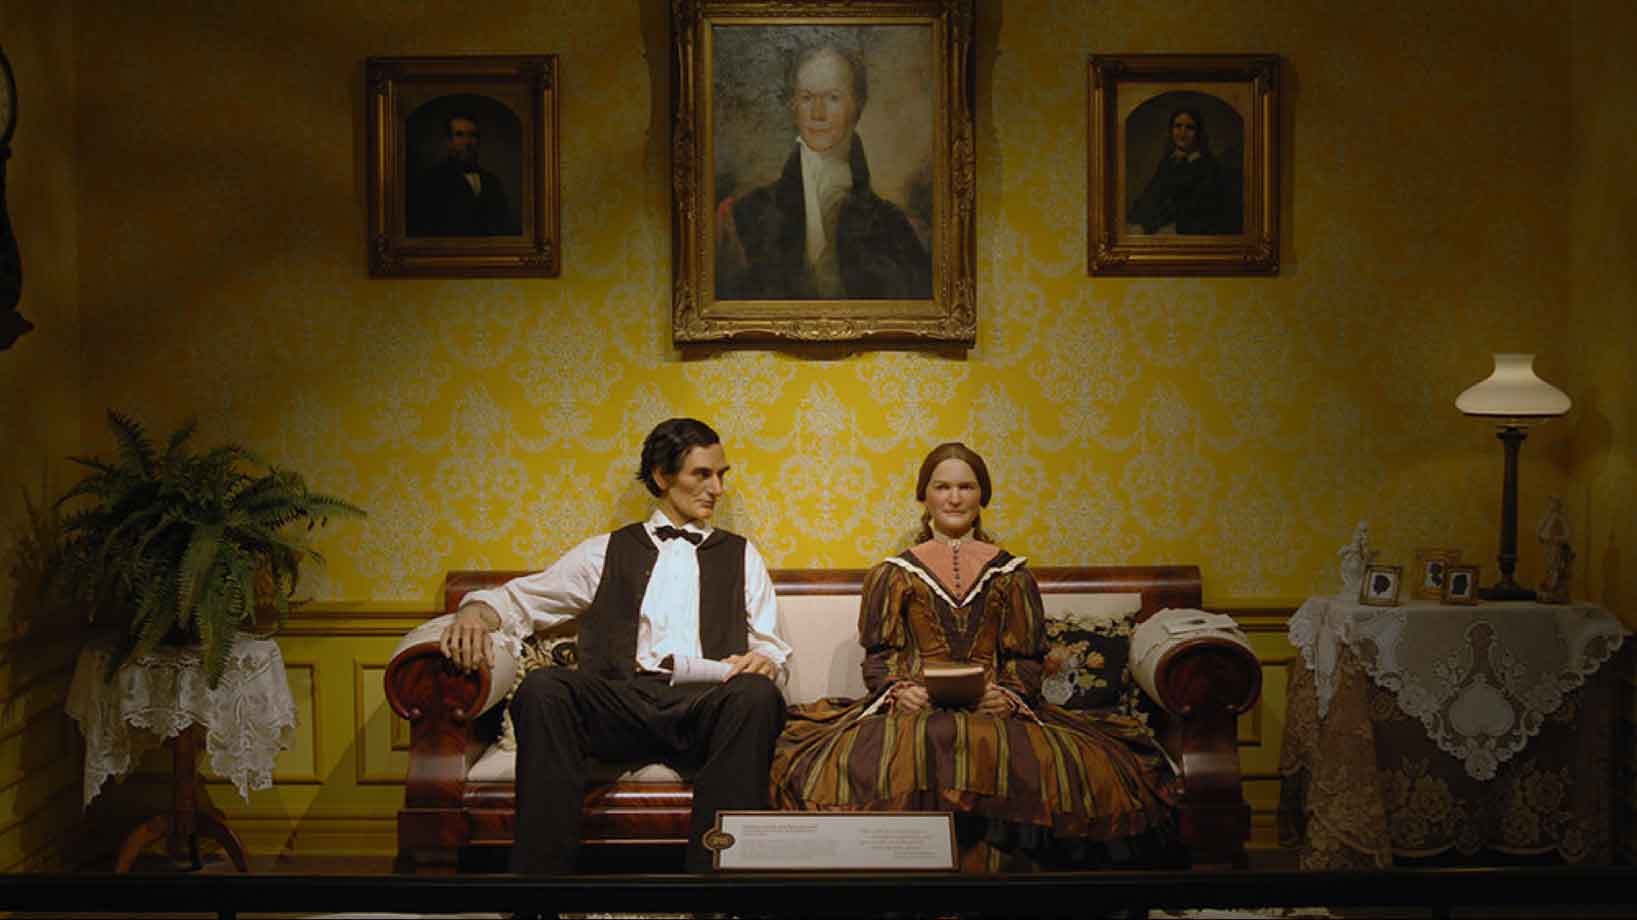 Abraham Lincoln sitting on couch with wife